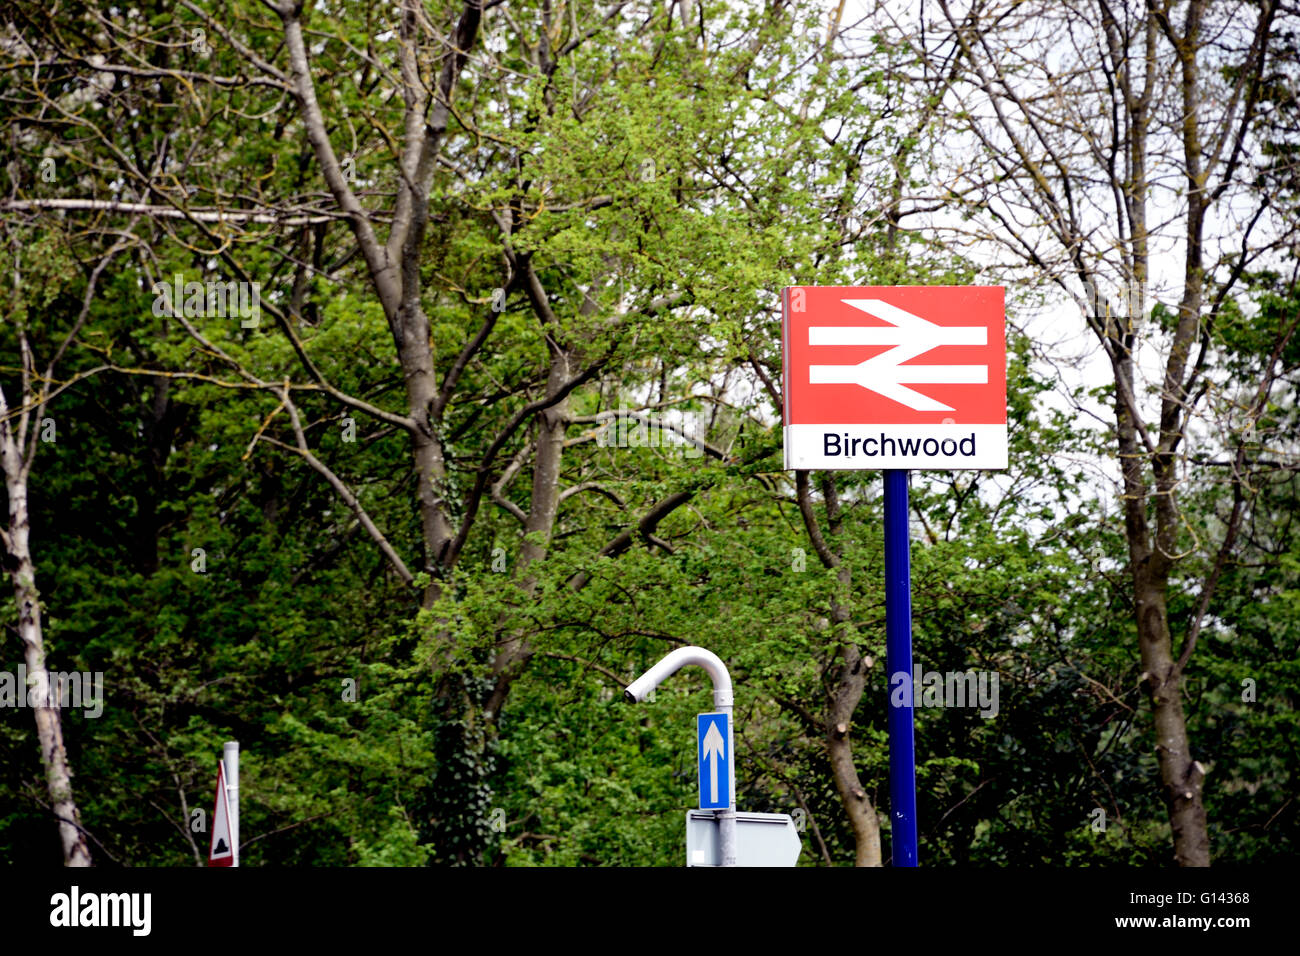 Birchwood, Warrington, Cheshire, UK 8th May, 2016. An incident at Birchwood rail station has closed the line between Manchester and Liverpool. There has been a fatality on the line and replacement transport is being put on by the rail franchises. Police and Ambulances are in attendance. Credit:  Mathew Monteith/Alamy Live News Stock Photo